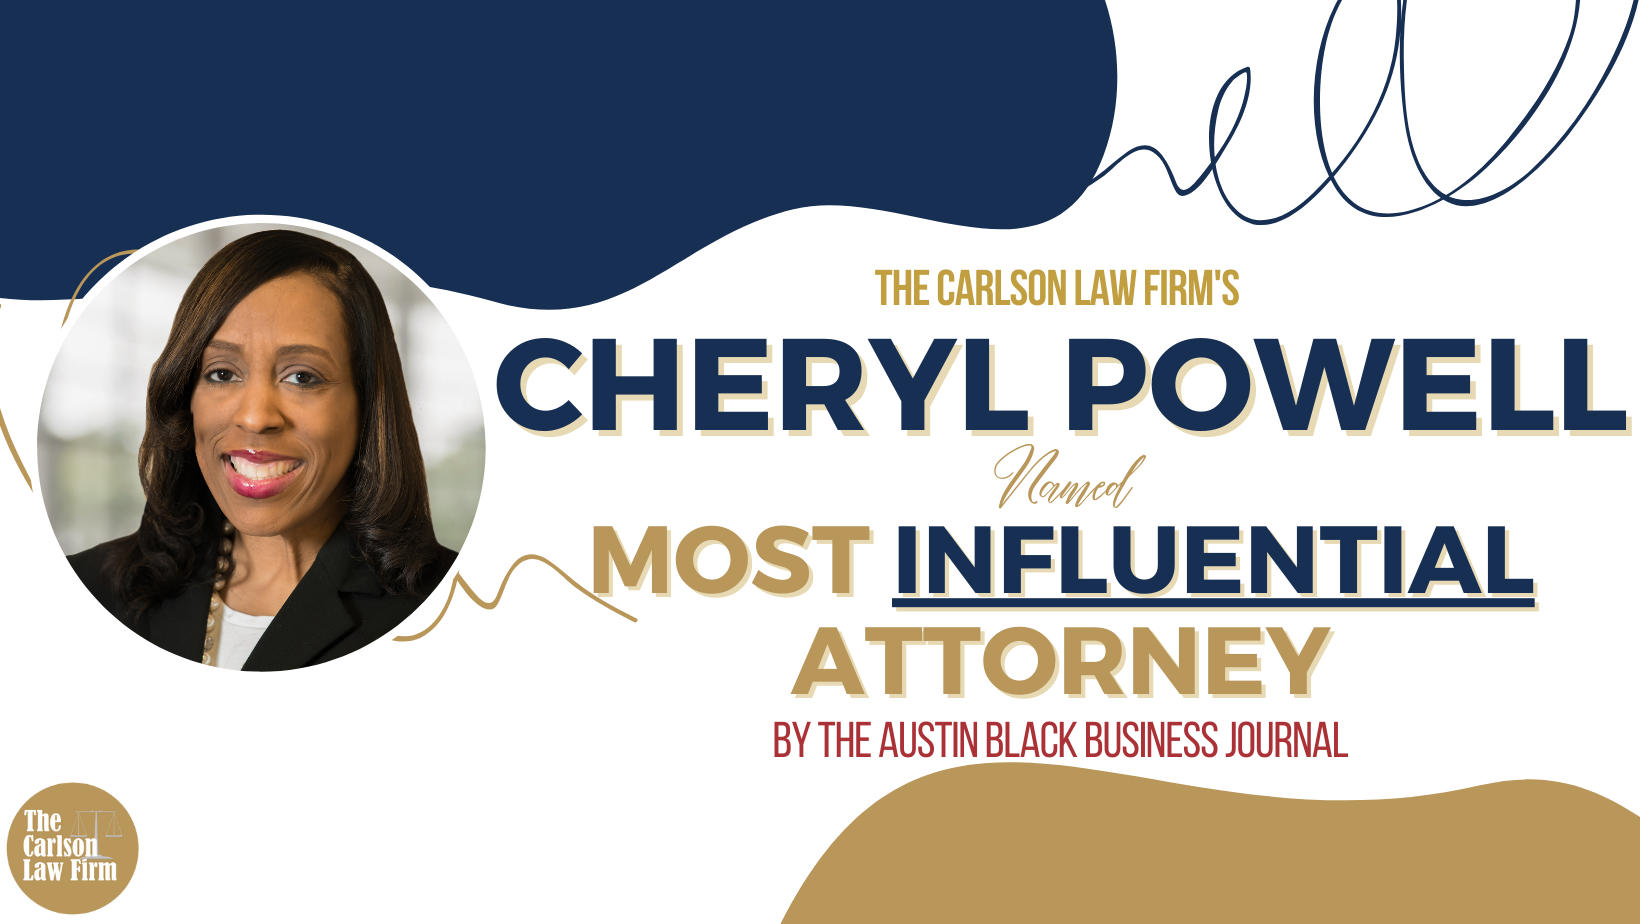 The Carlson Law Firm's Cheryl Powell Was Named One Of Austin's Most Influential Attorneys